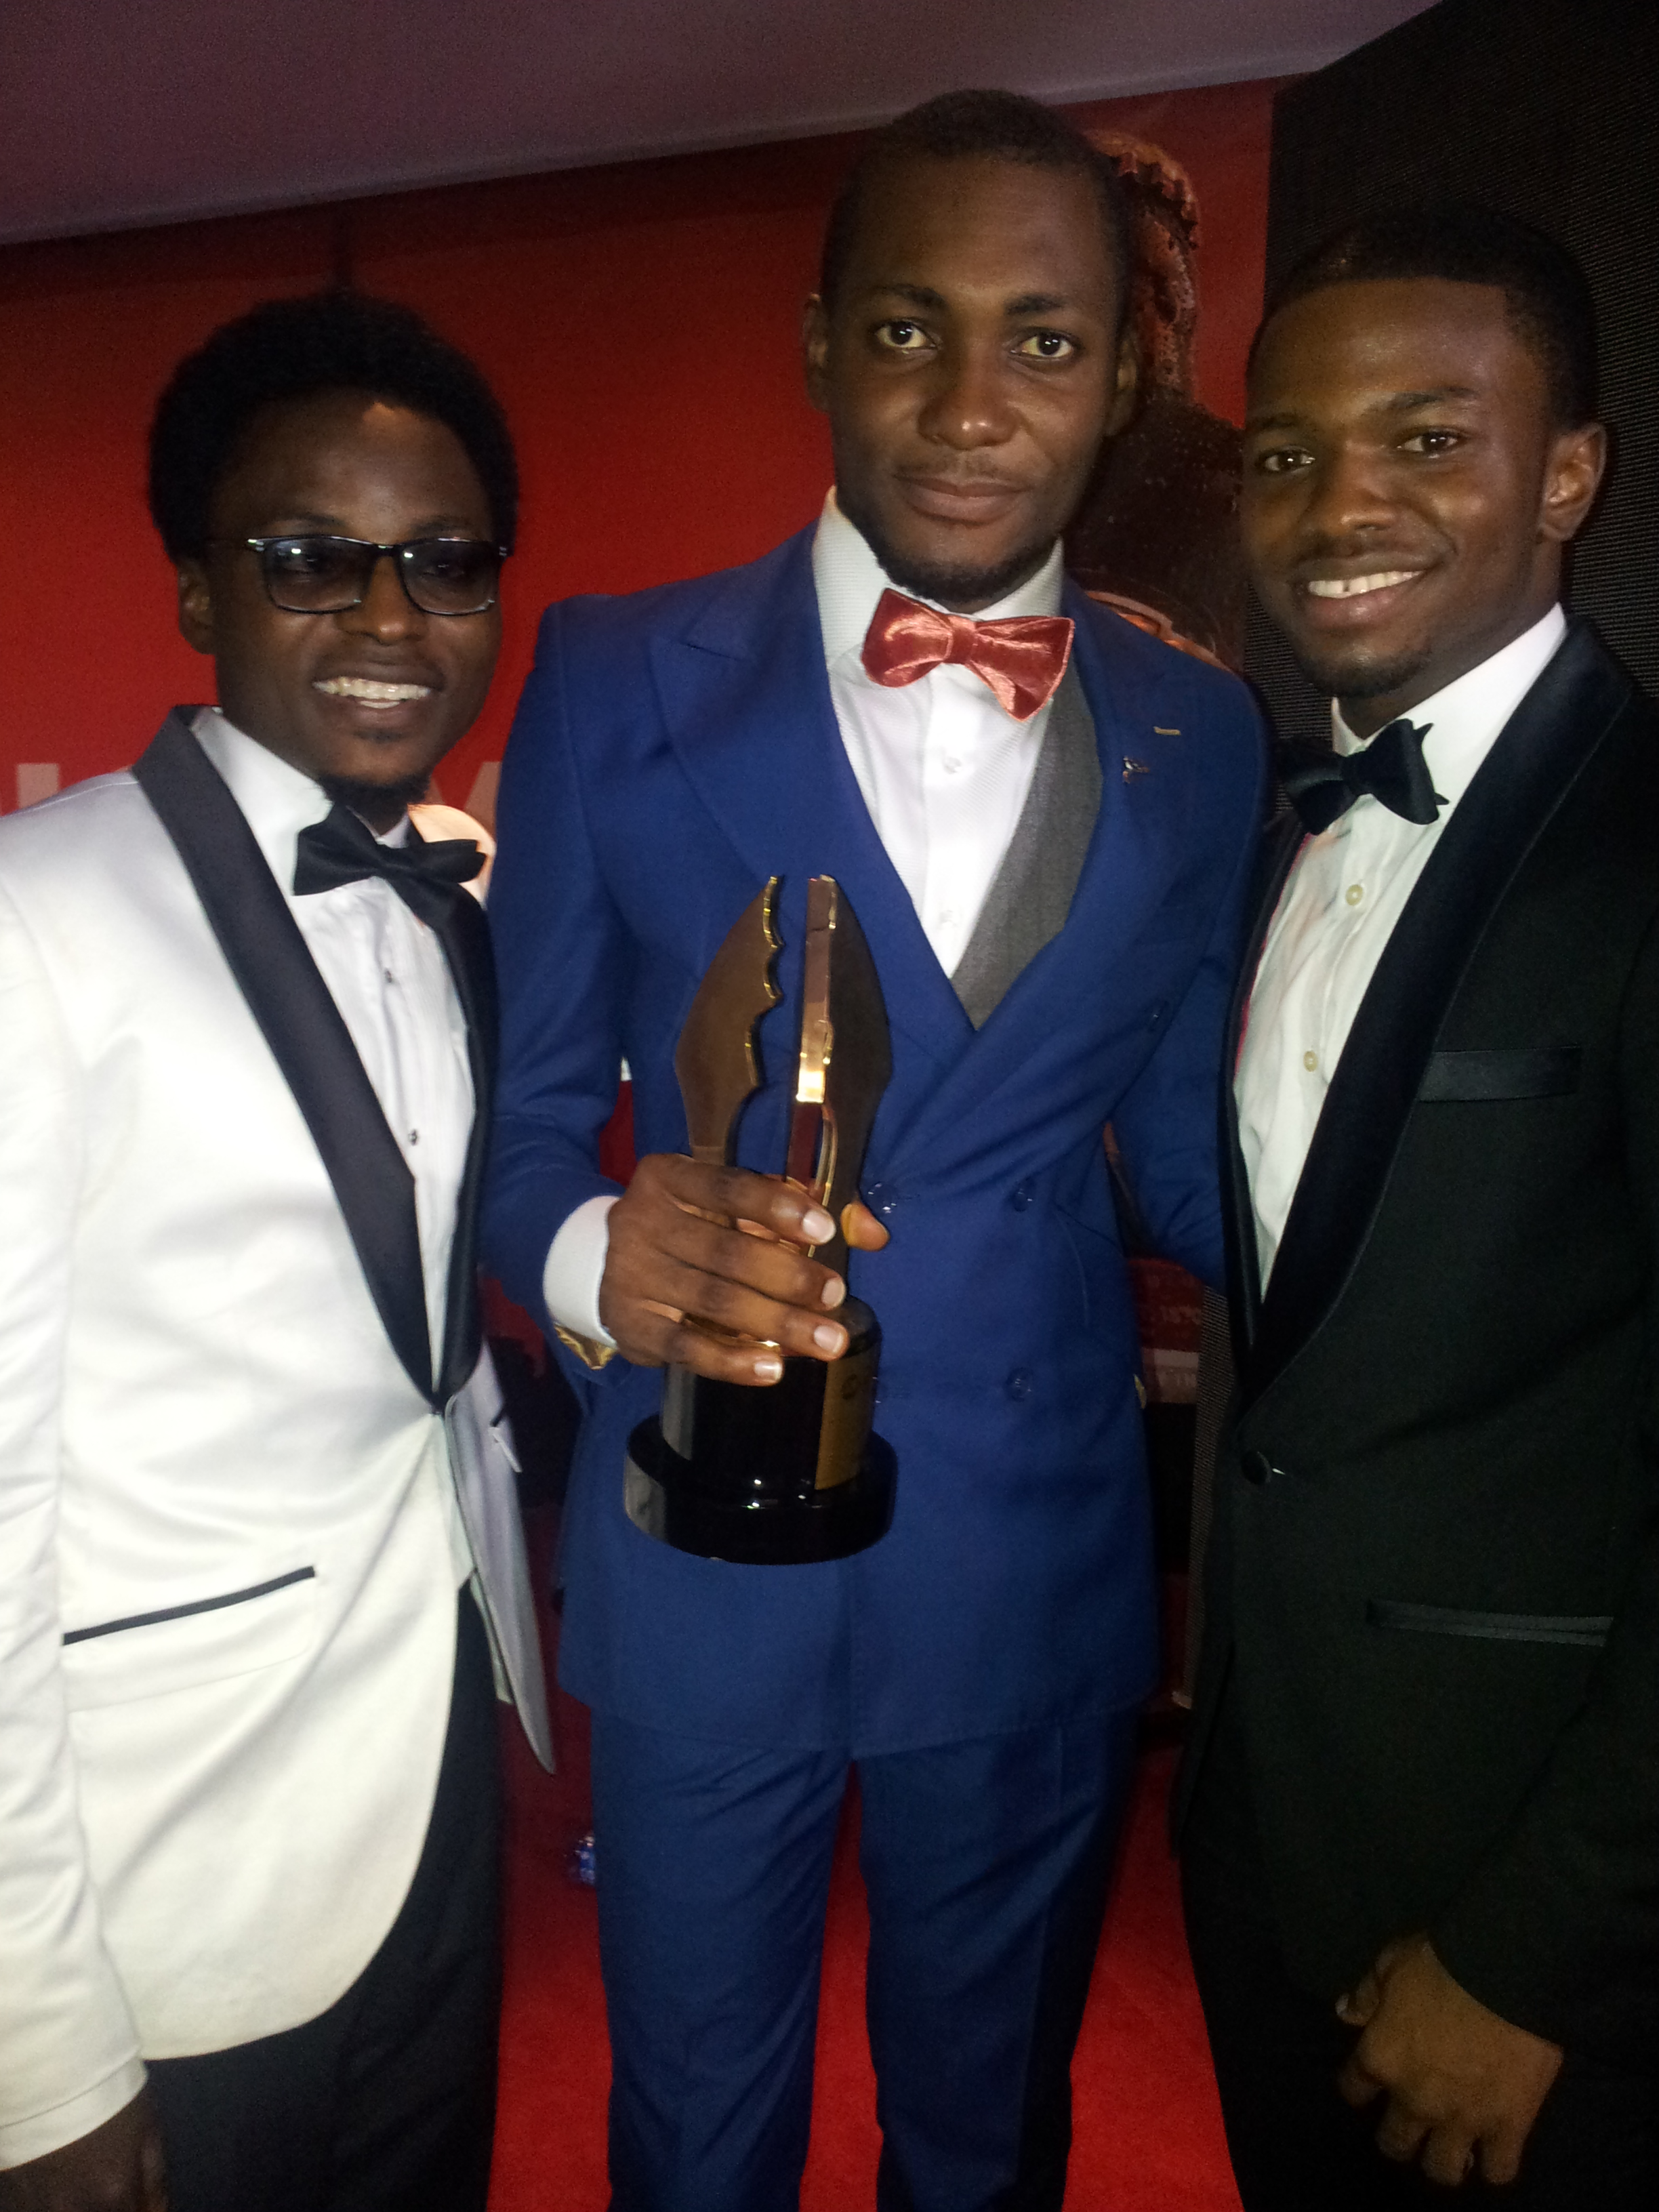 A Mile From Home (Tope Tedela) wins AMVCA Best Actor awards, 2014